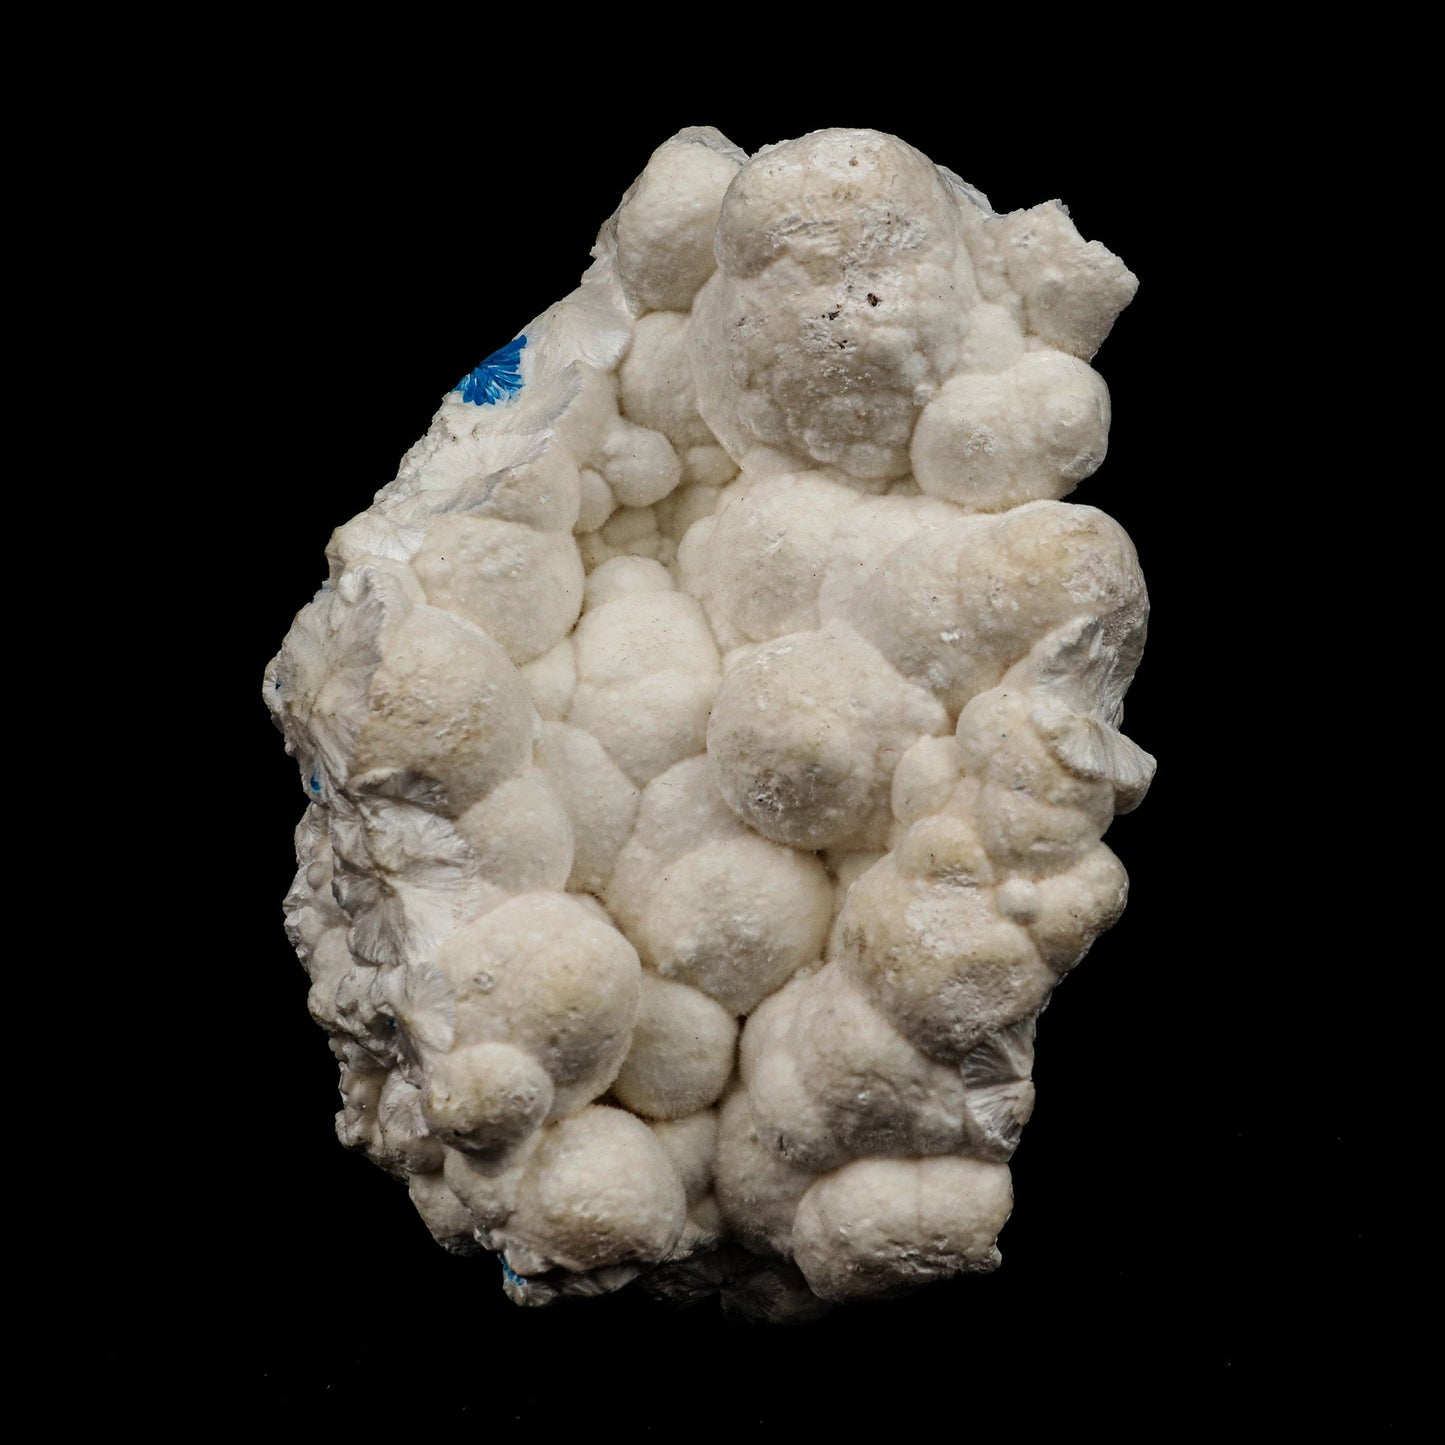 Cavansite on Mordenite Rare Find Natural Mineral Specimen # B 5141  https://www.superbminerals.us/products/cavansite-on-mordenite-rare-find-natural-mineral-specimen-b-5141  Features: Unusual combination of a large spherical rosette diameter of blue-green cavansite crystals on white mordenite-coated matrix . Primary Mineral(s): Cavansite Secondary Mineral(s): MordeniteMatrix: N/A 3 Inch x 2 InchWeight : 76 GmsLocality: Pune, Maharashtra, India Year of Discovery: 2021